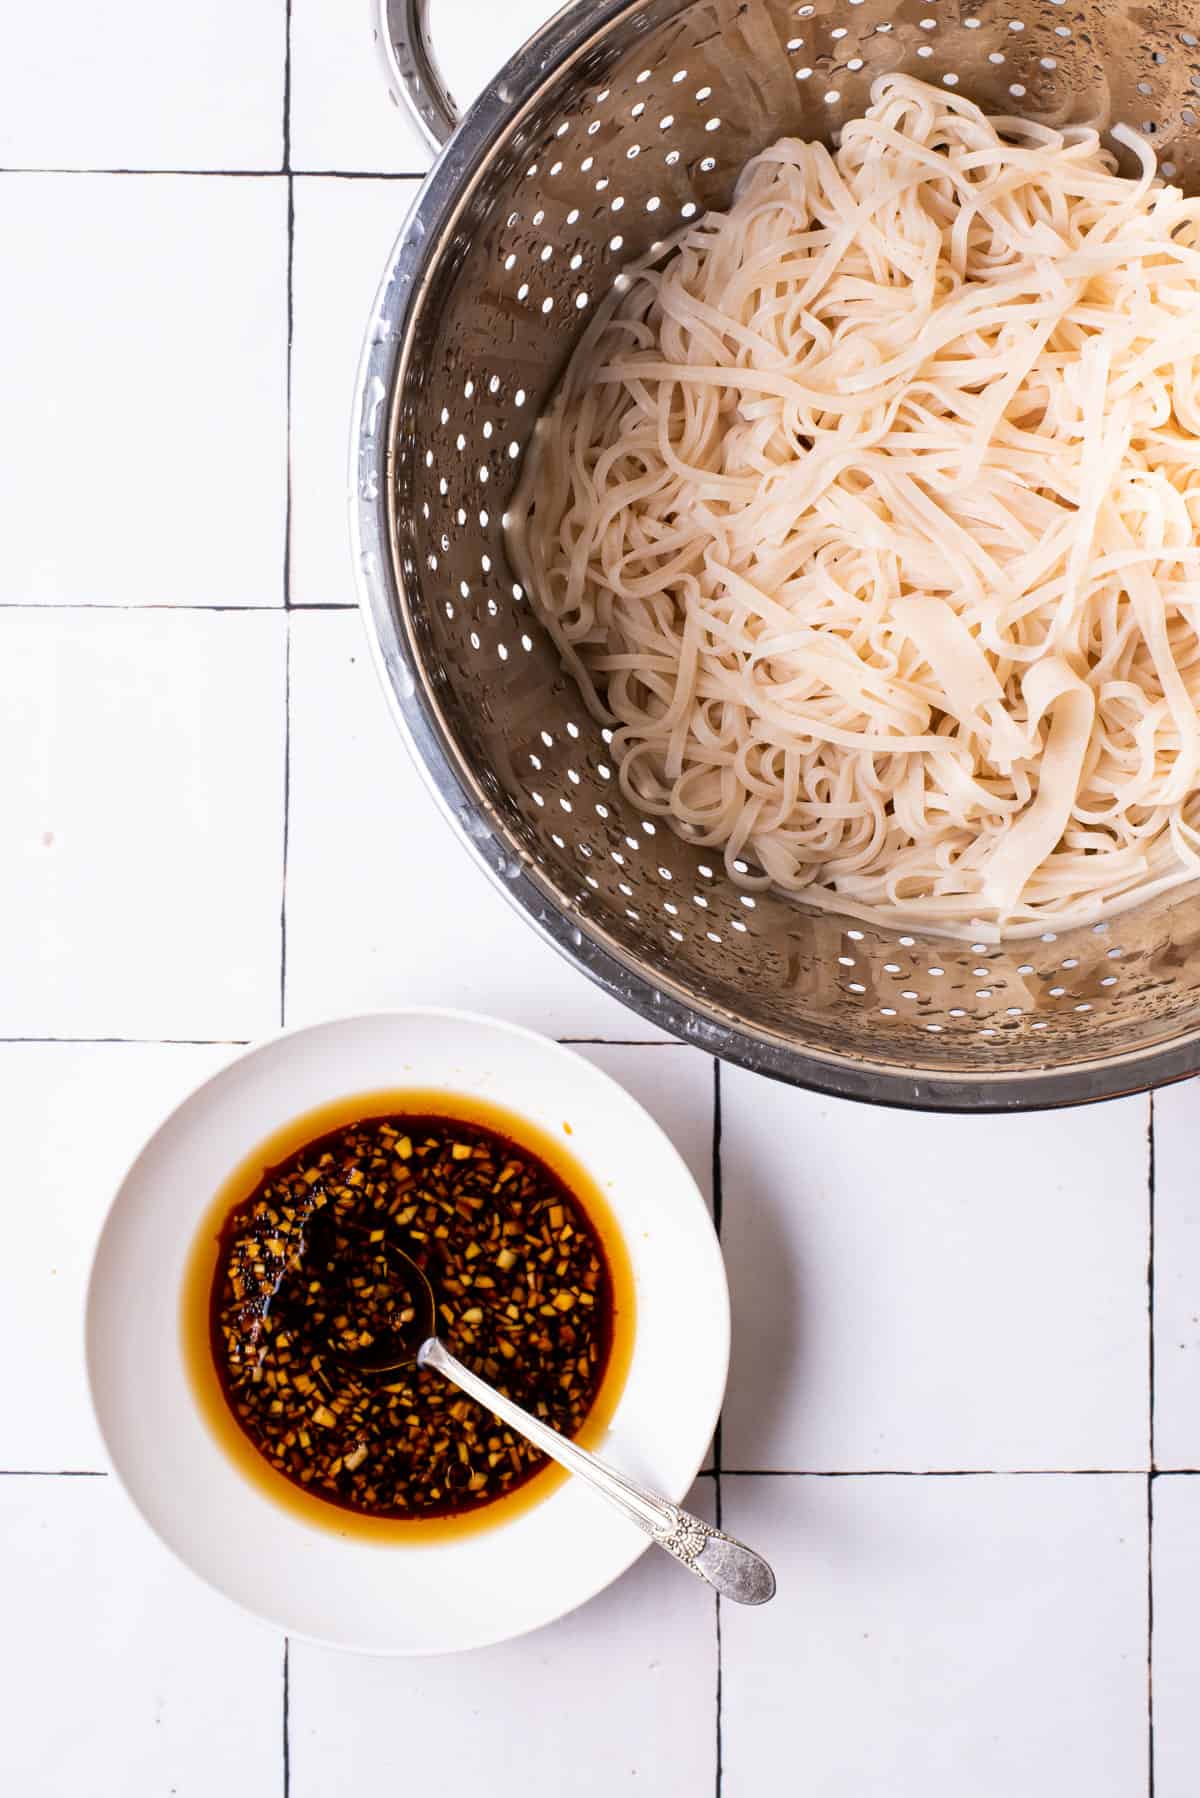 Drained rice noodles in a colander next to stir fry sauce.